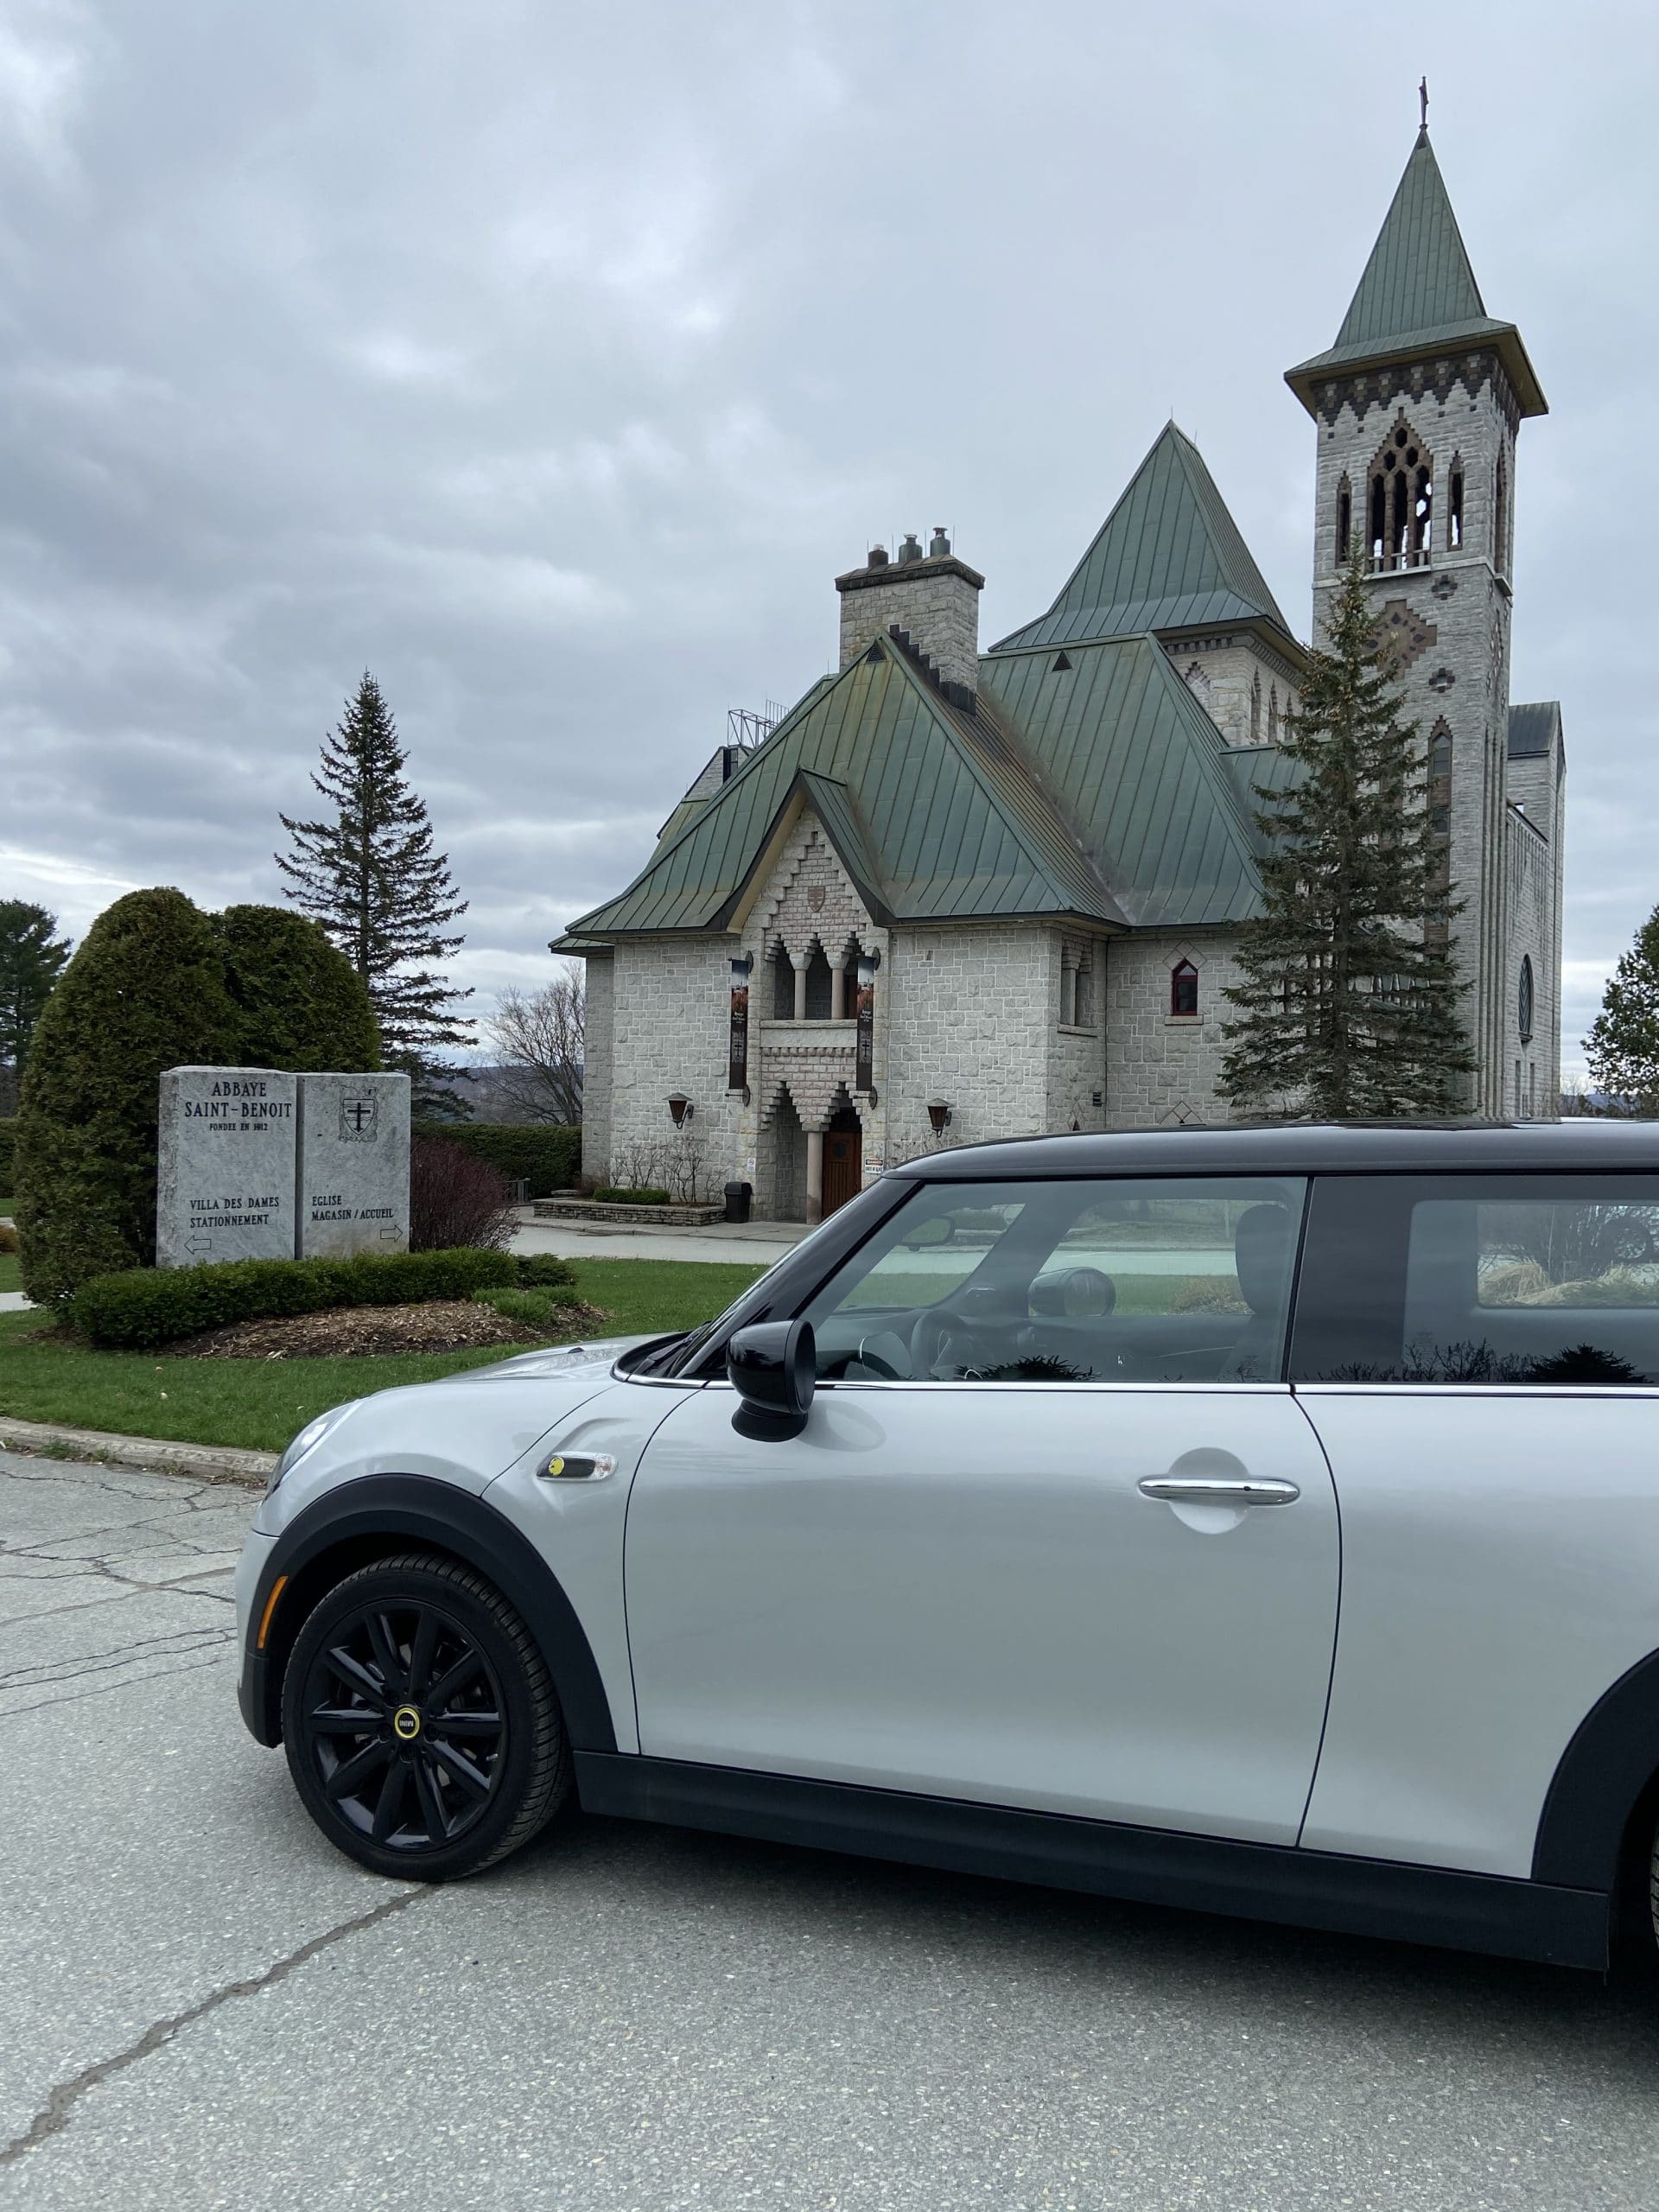 2021 MINI Cooper SE 100% electric in front of a Québec cheese factory